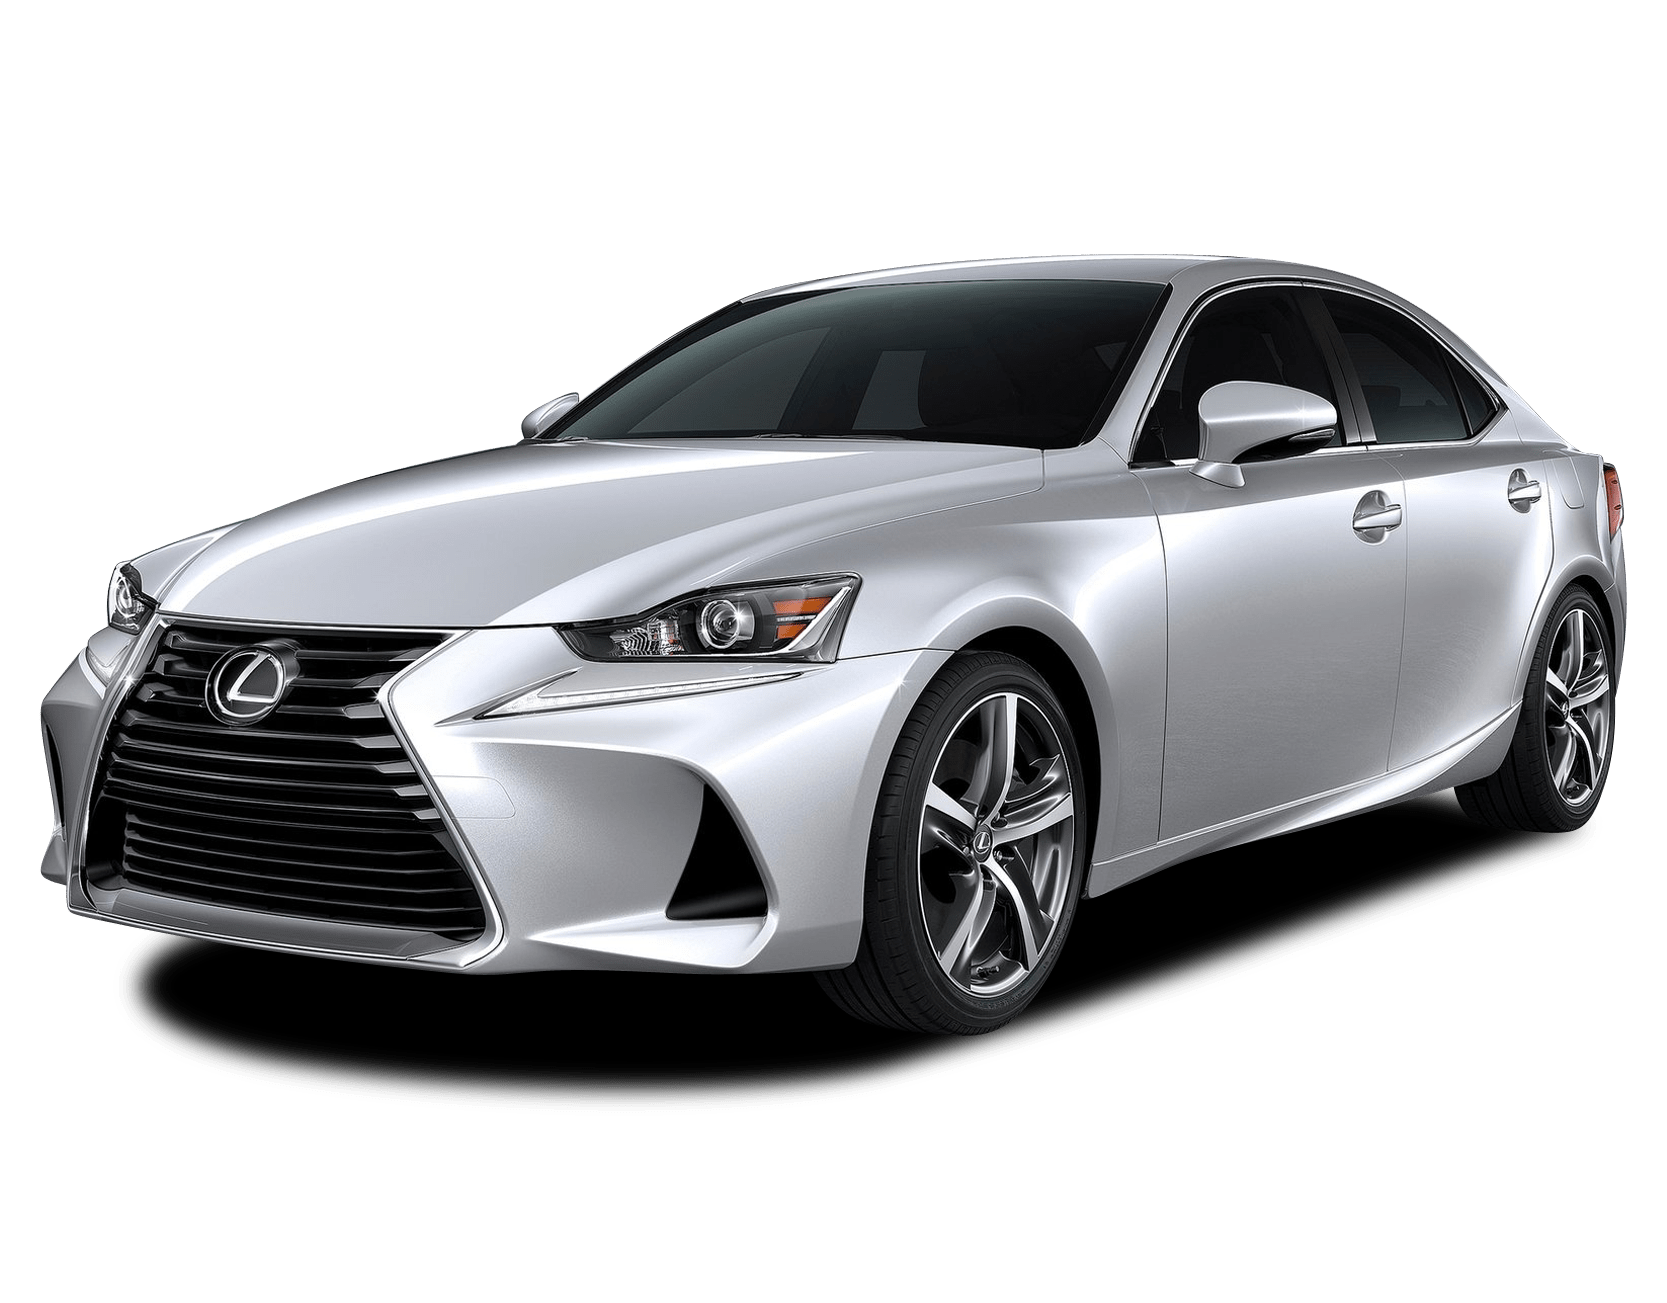 Lexus IS 200t Review, For Sale, Specs, Interior & Models in Australia | CarsGuide